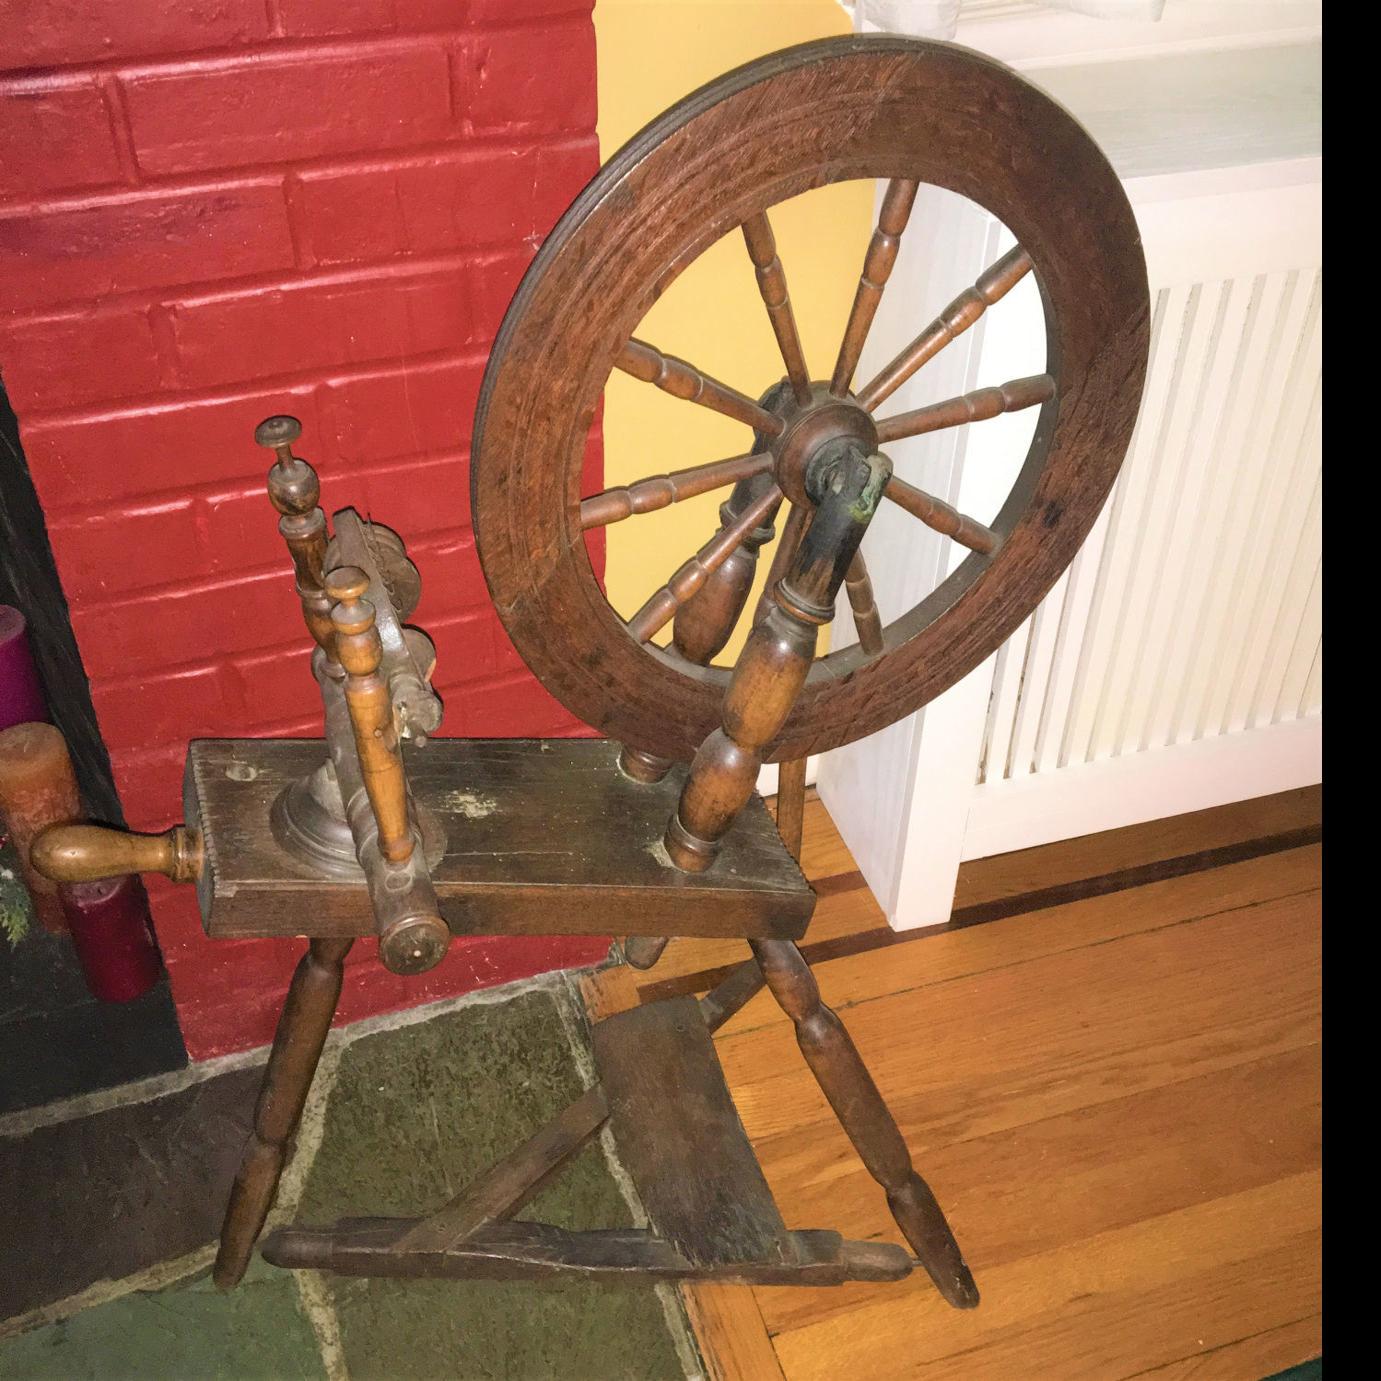 Treasures In Your Attic: Saxony spinning wheels fairly common, Lifestyles